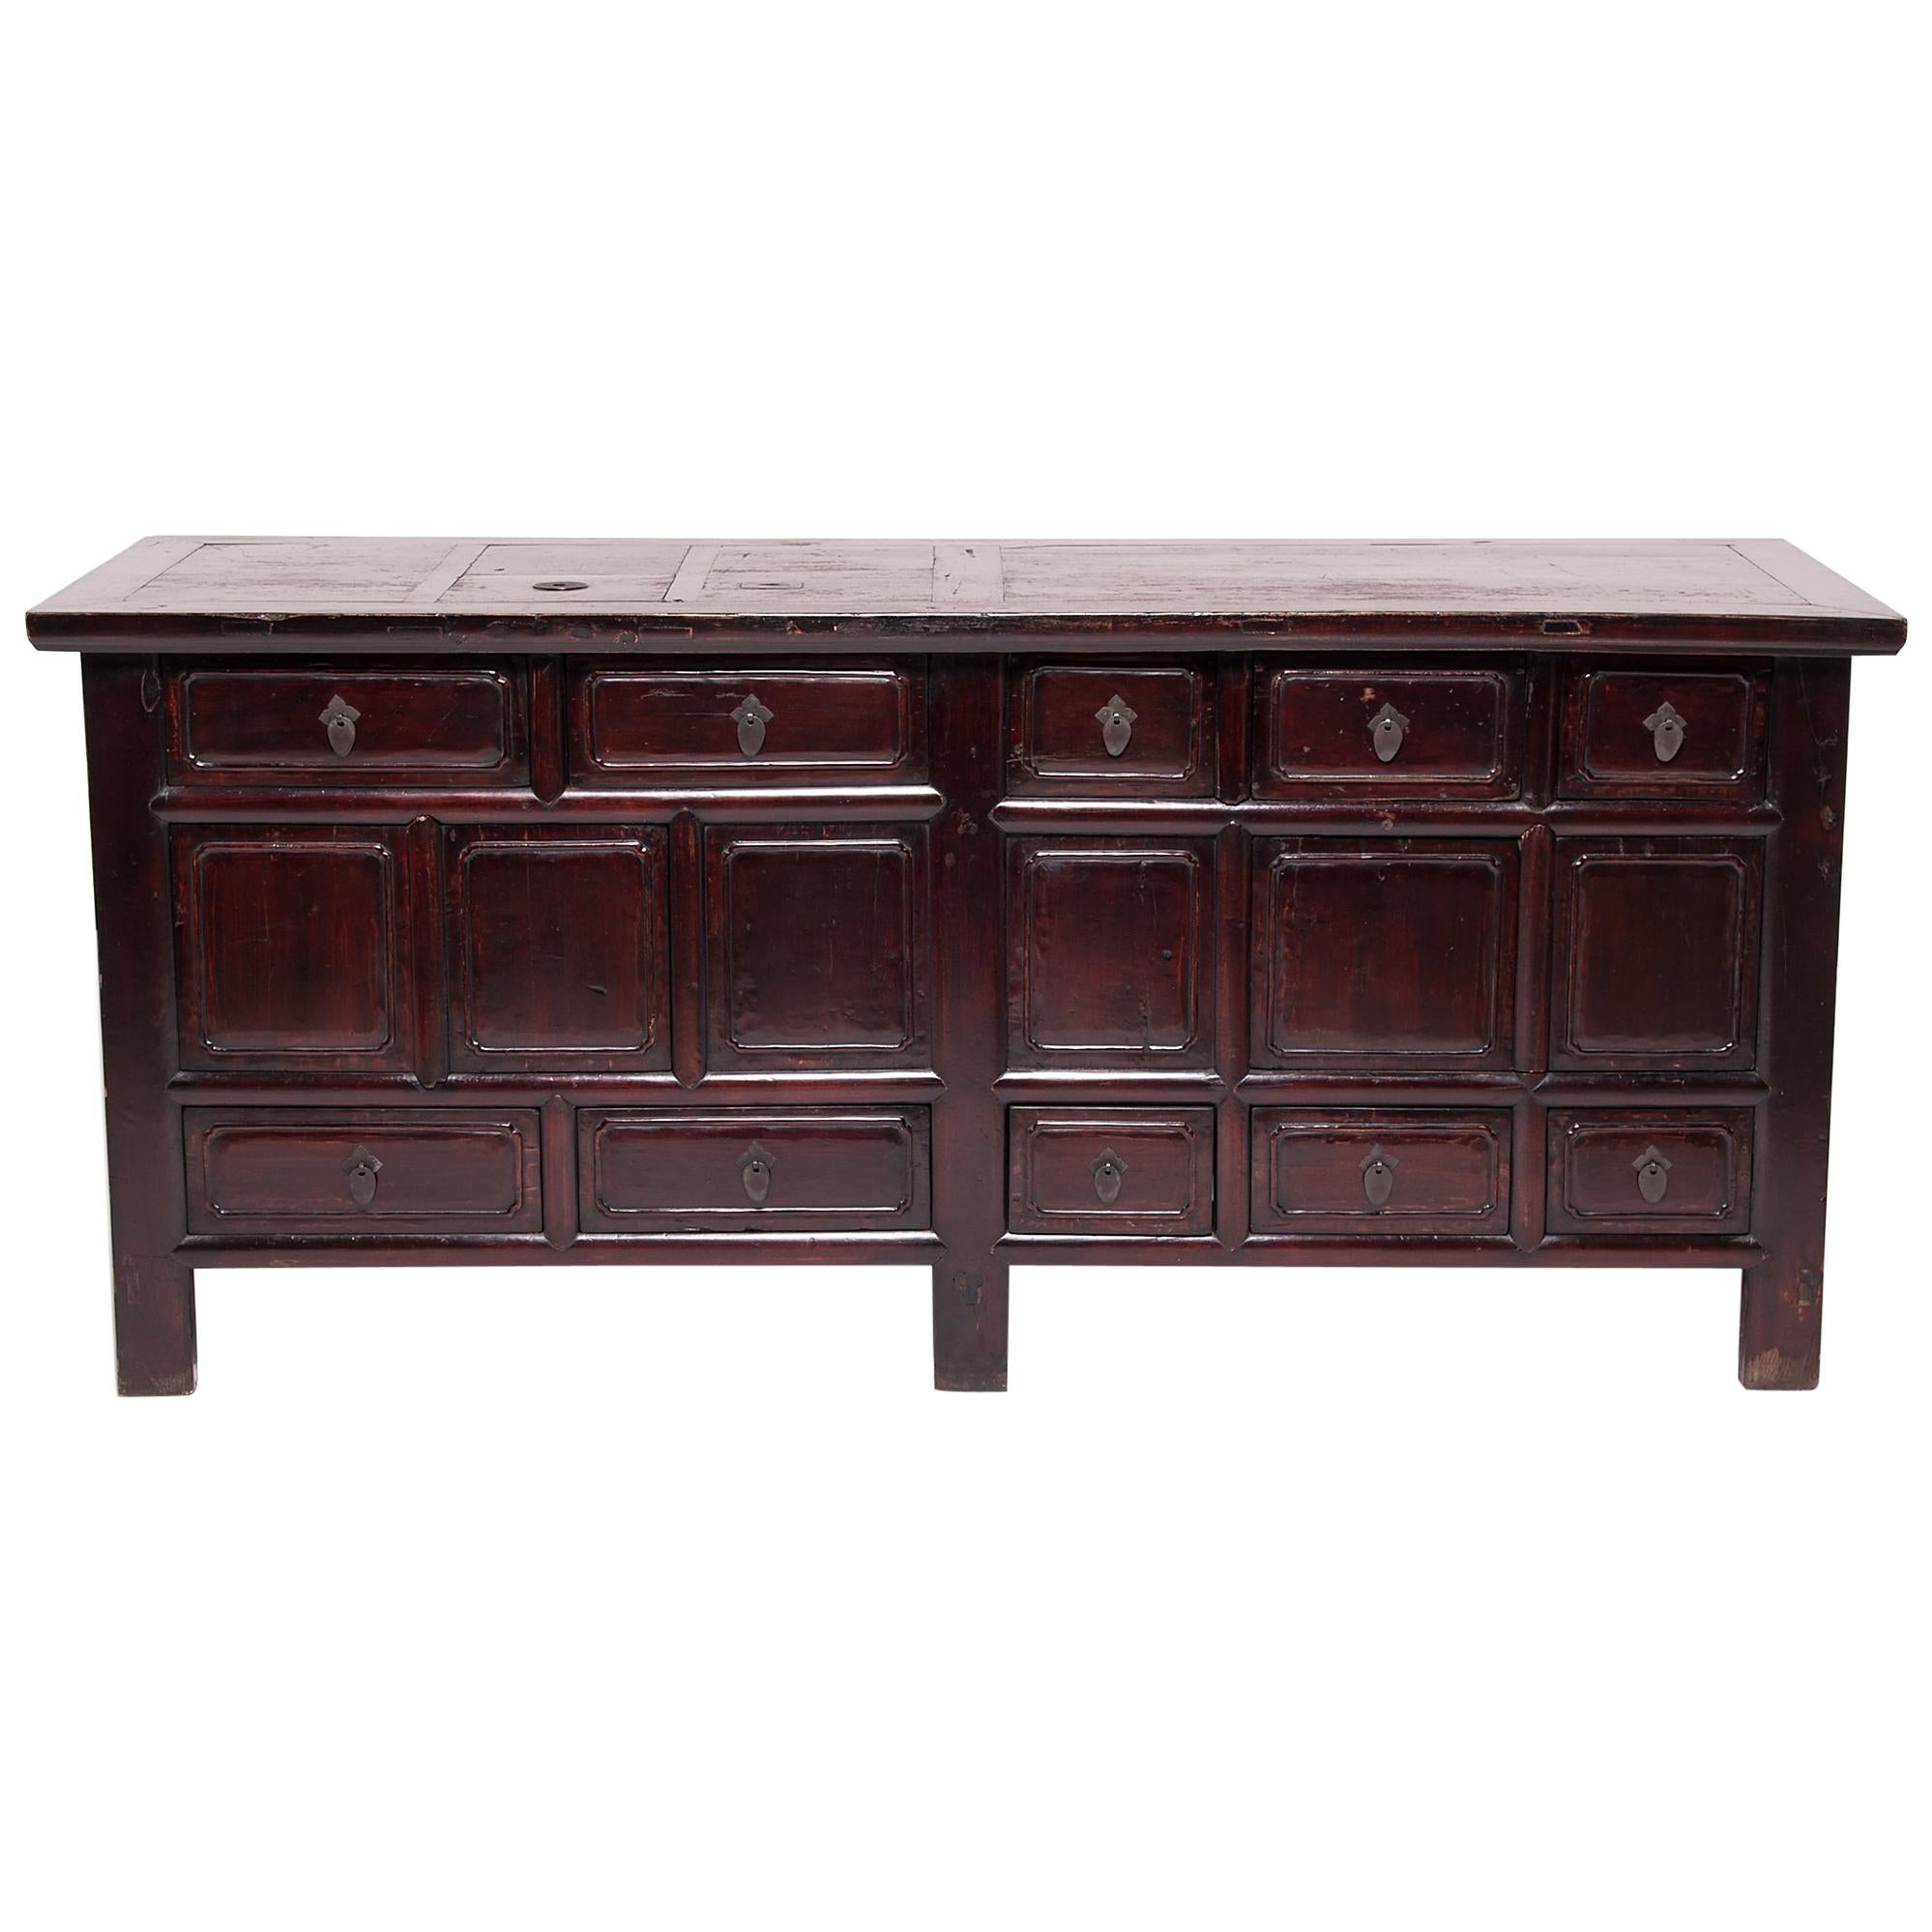 Chinese Ten-Drawer Lacquered Sideboard, c. 1900